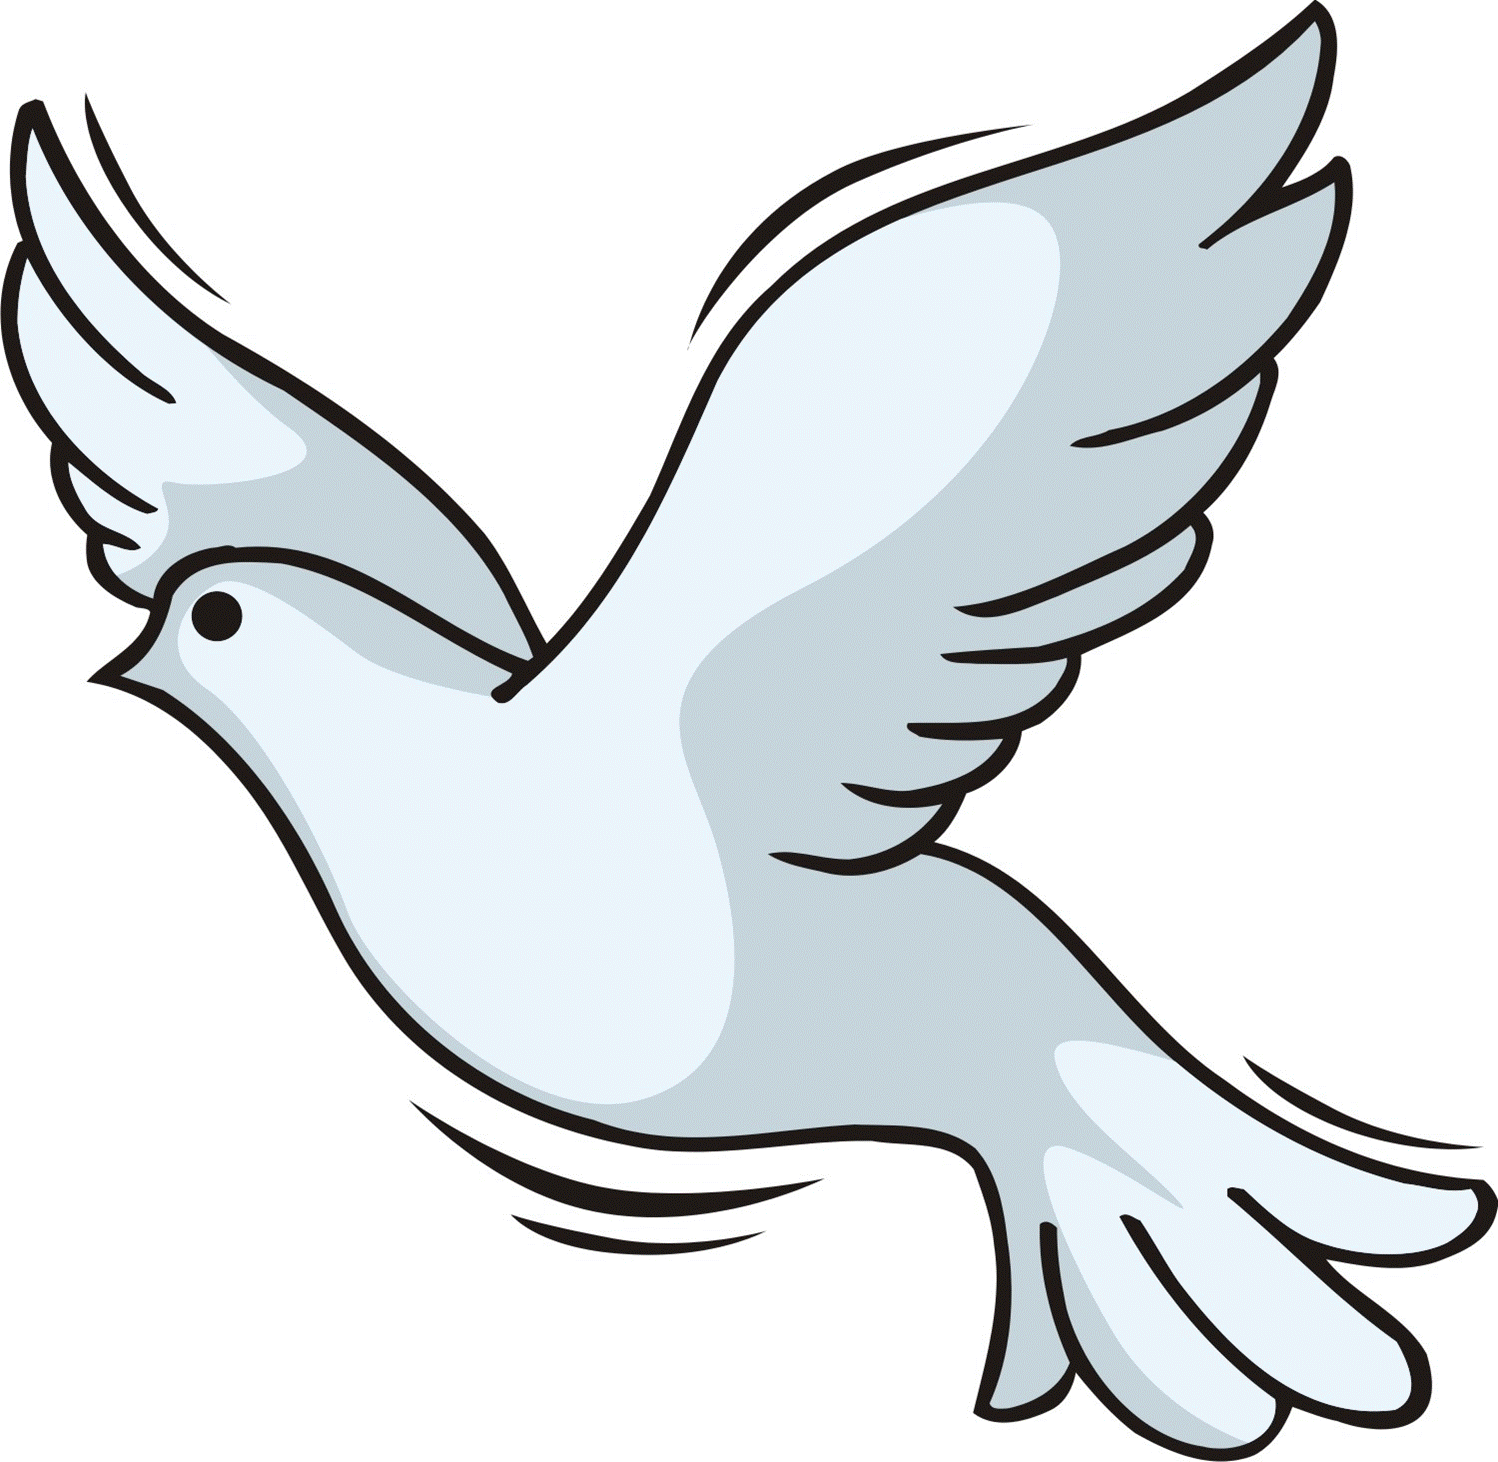 Holy spirit dove clipart free images